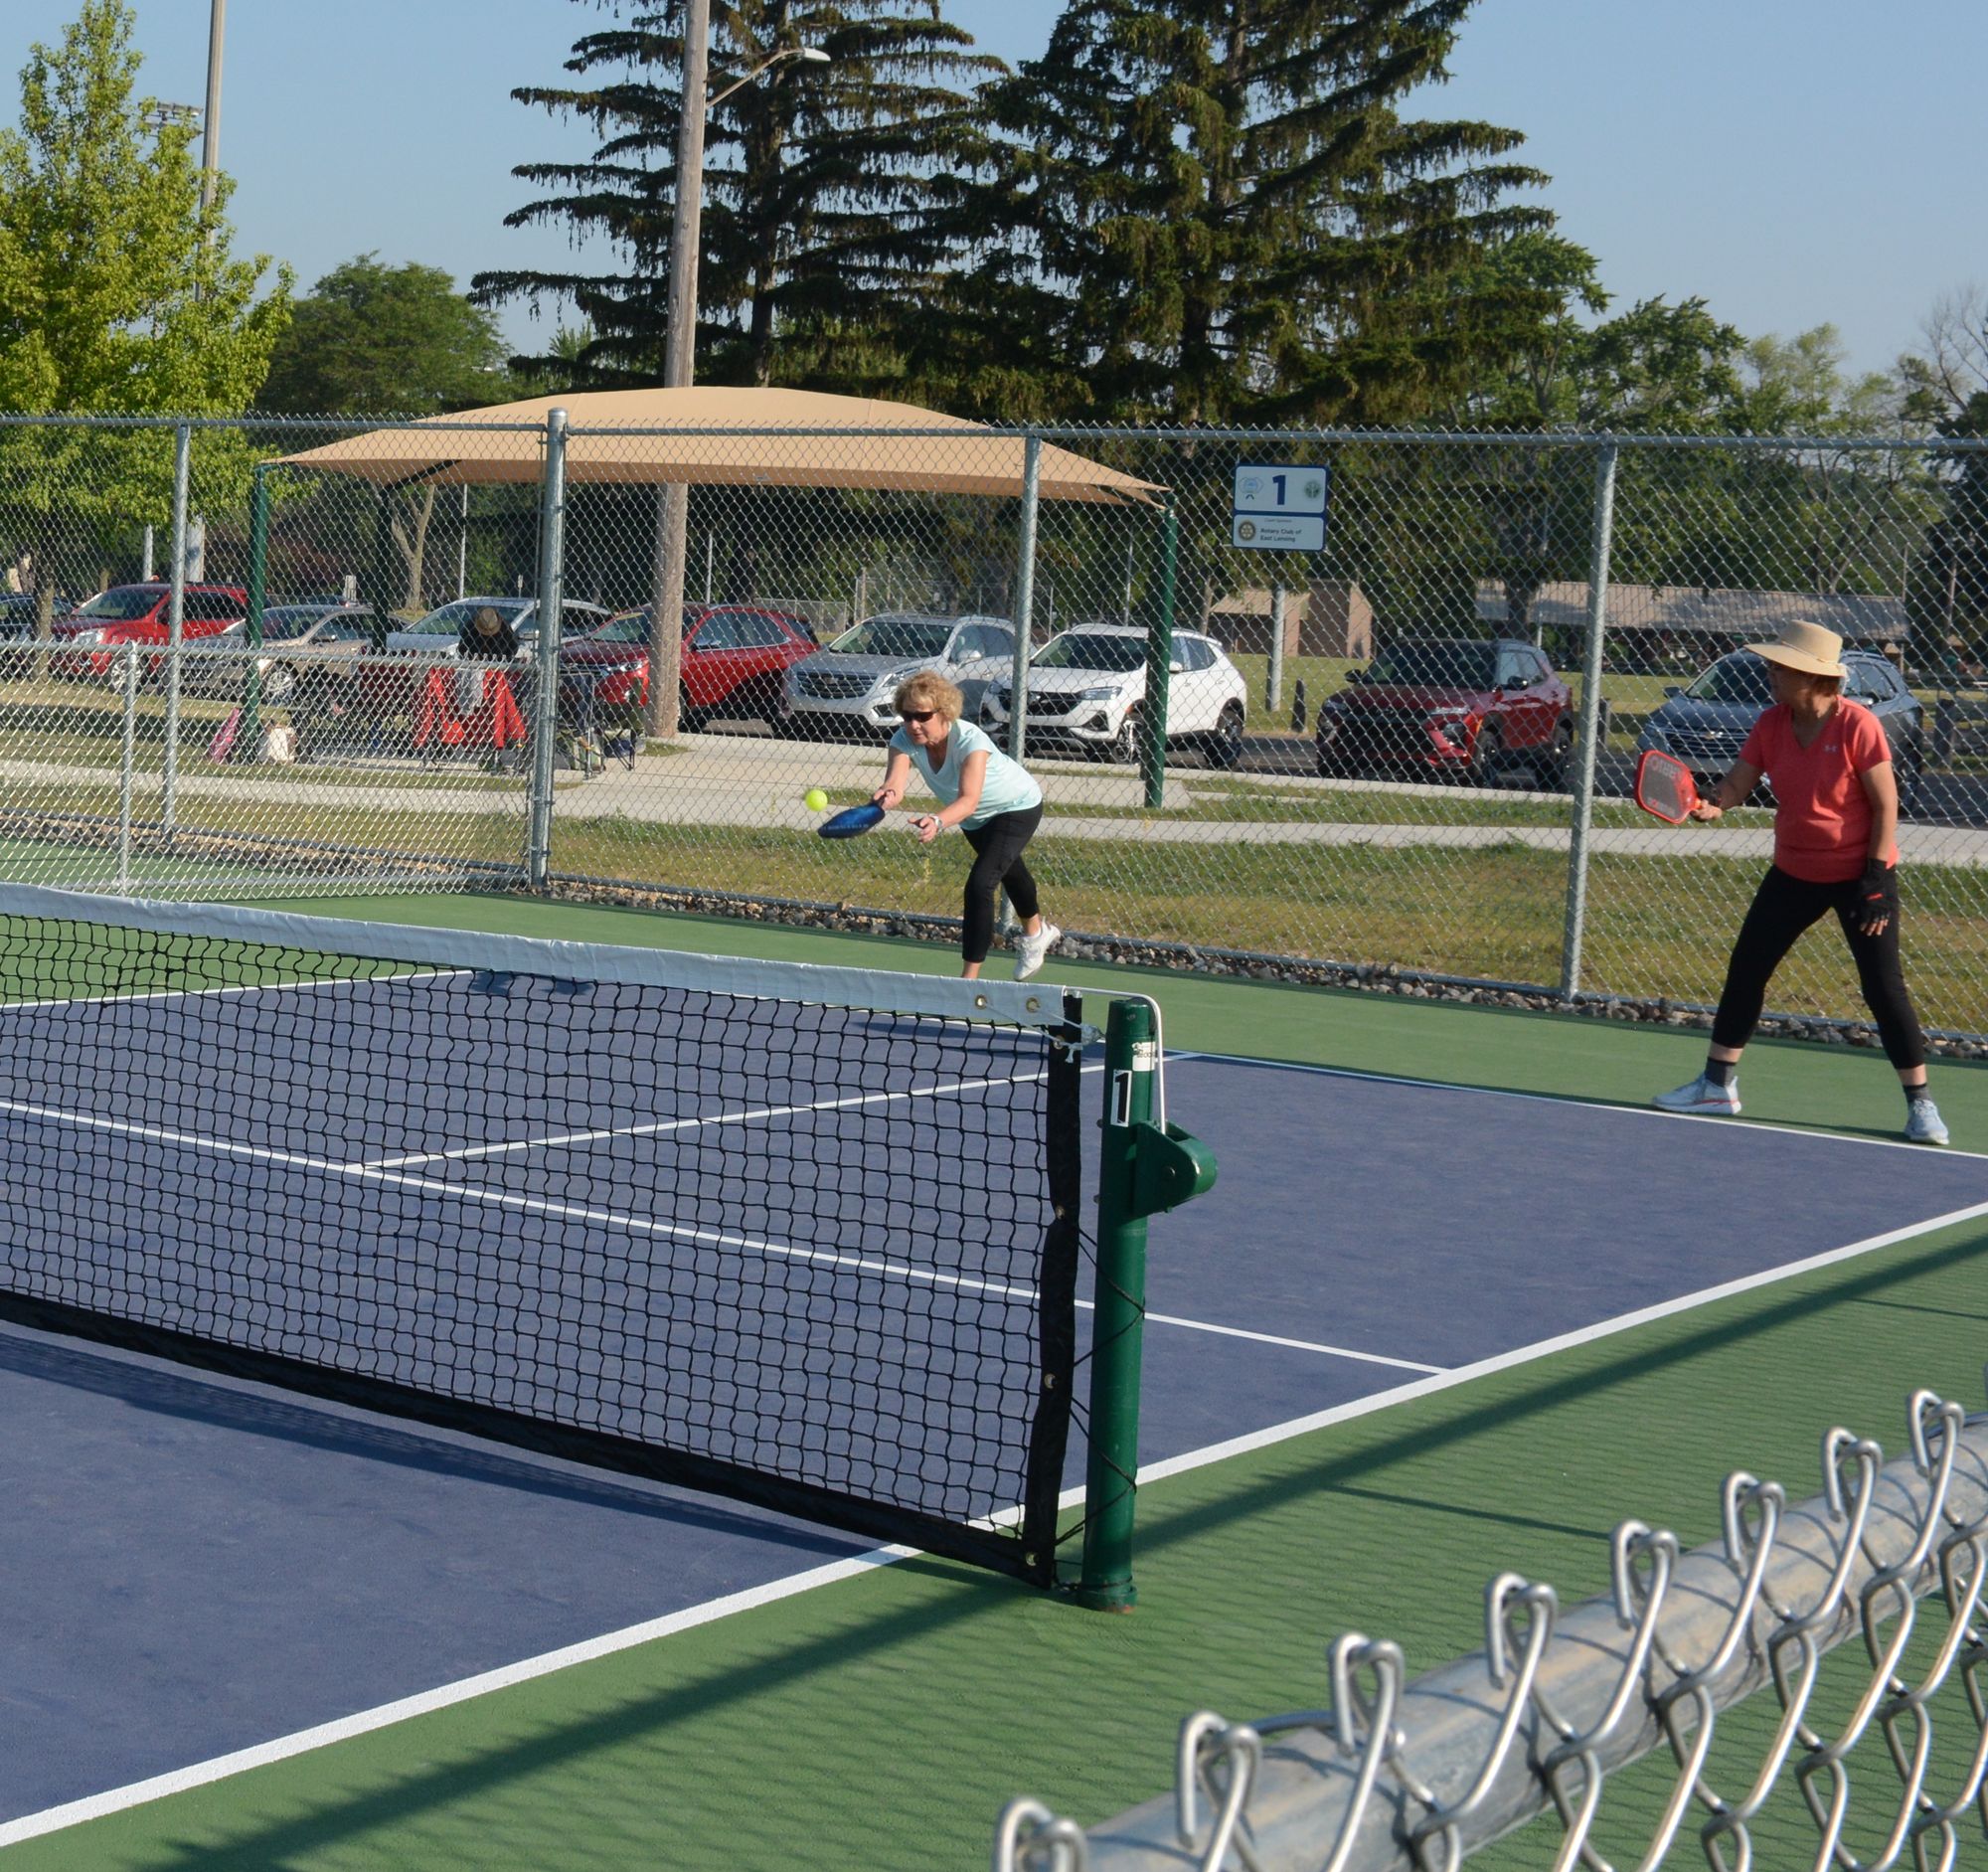 Ask ELi: A Million Dollars for the Pickleball Courts?